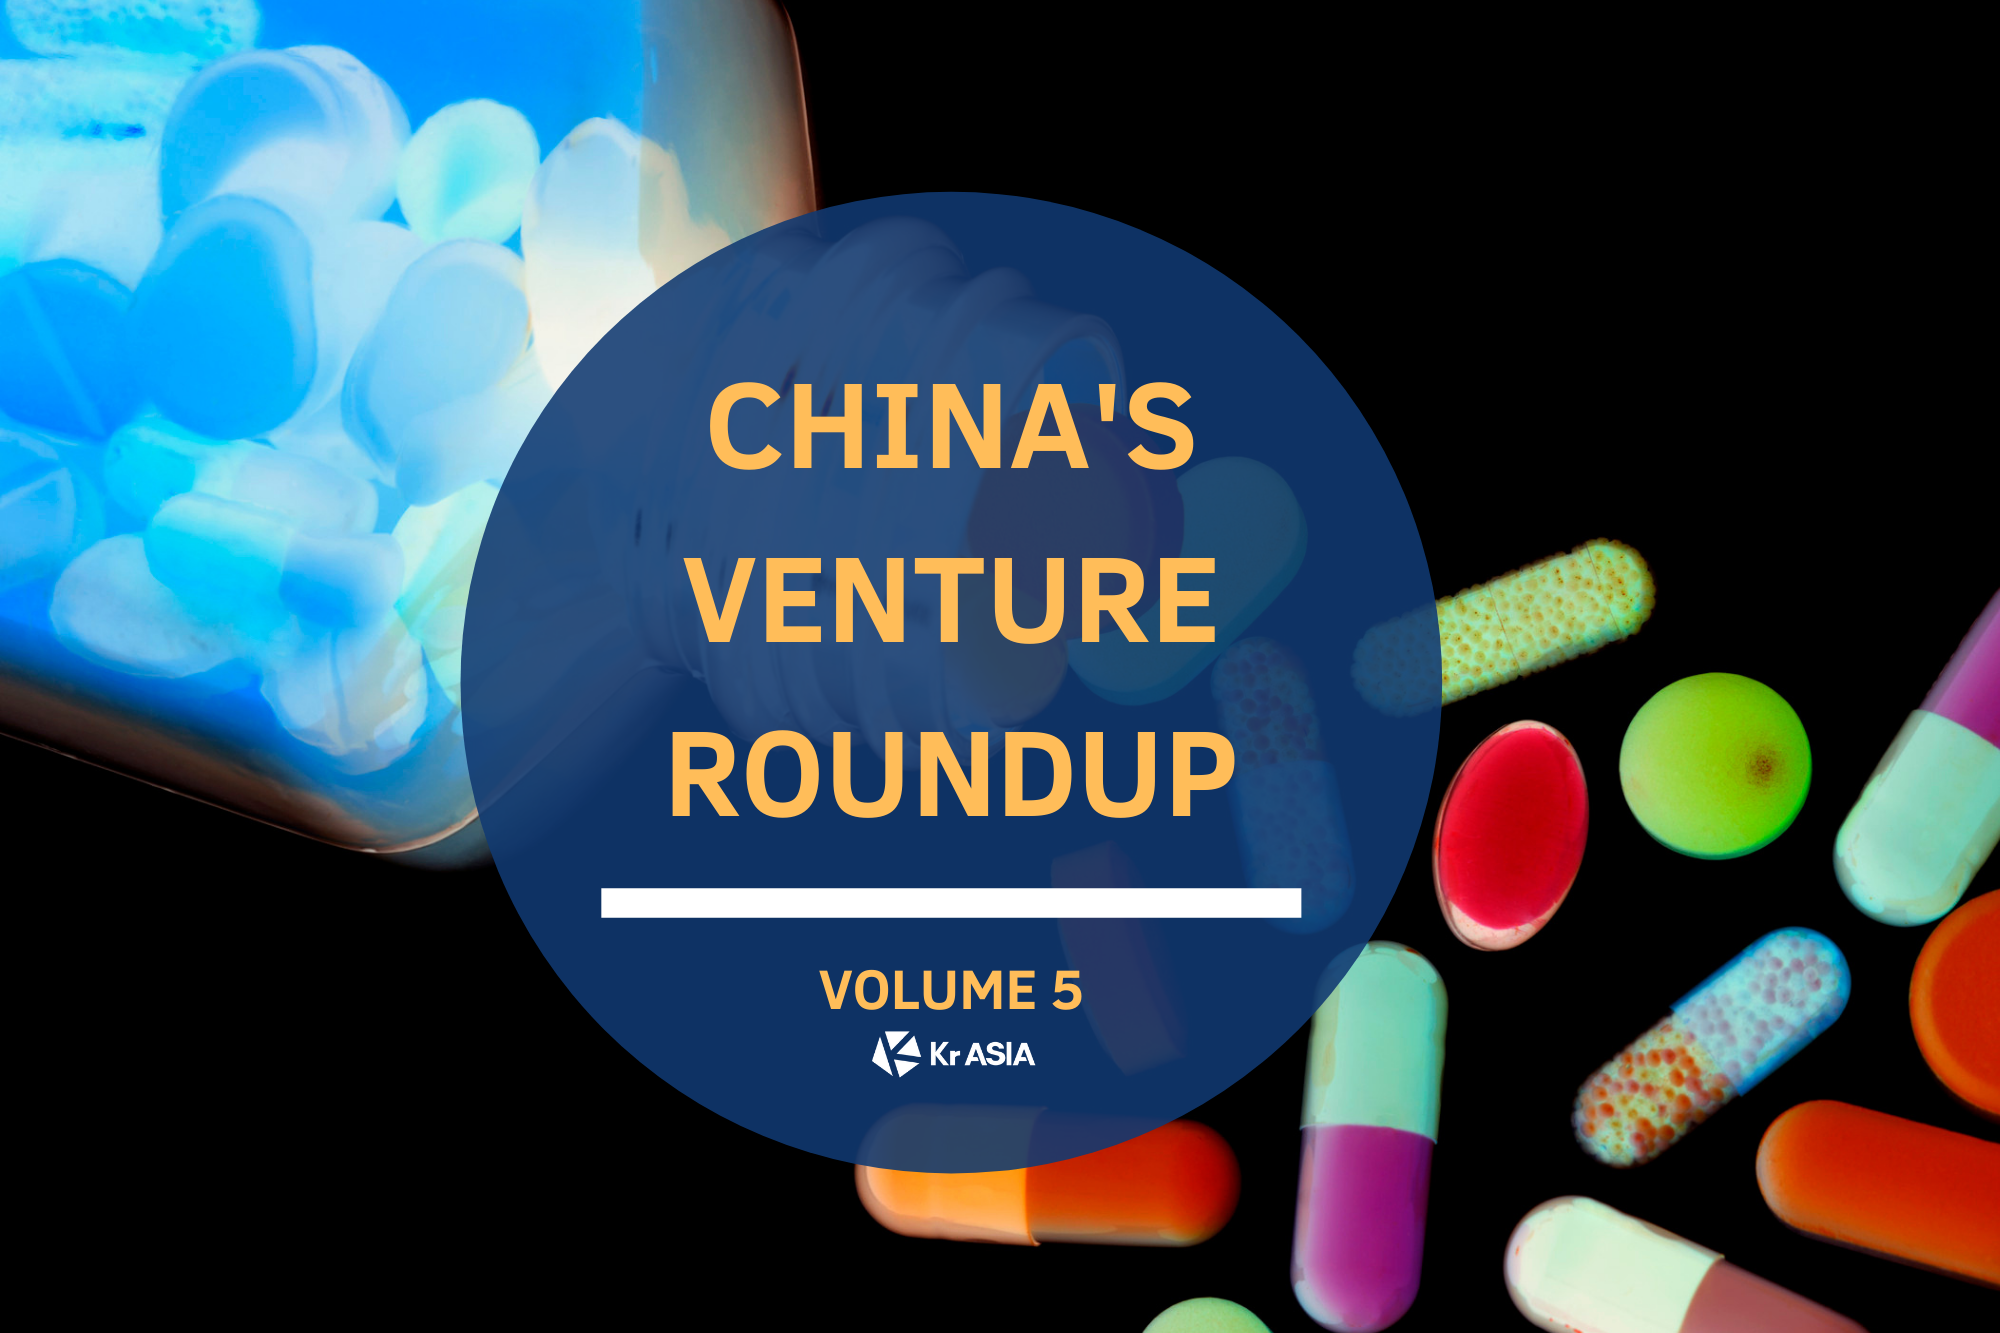 Weekly VC activity falls short of expectation while COVID-19 themes remain strong | China Venture Roundup 5